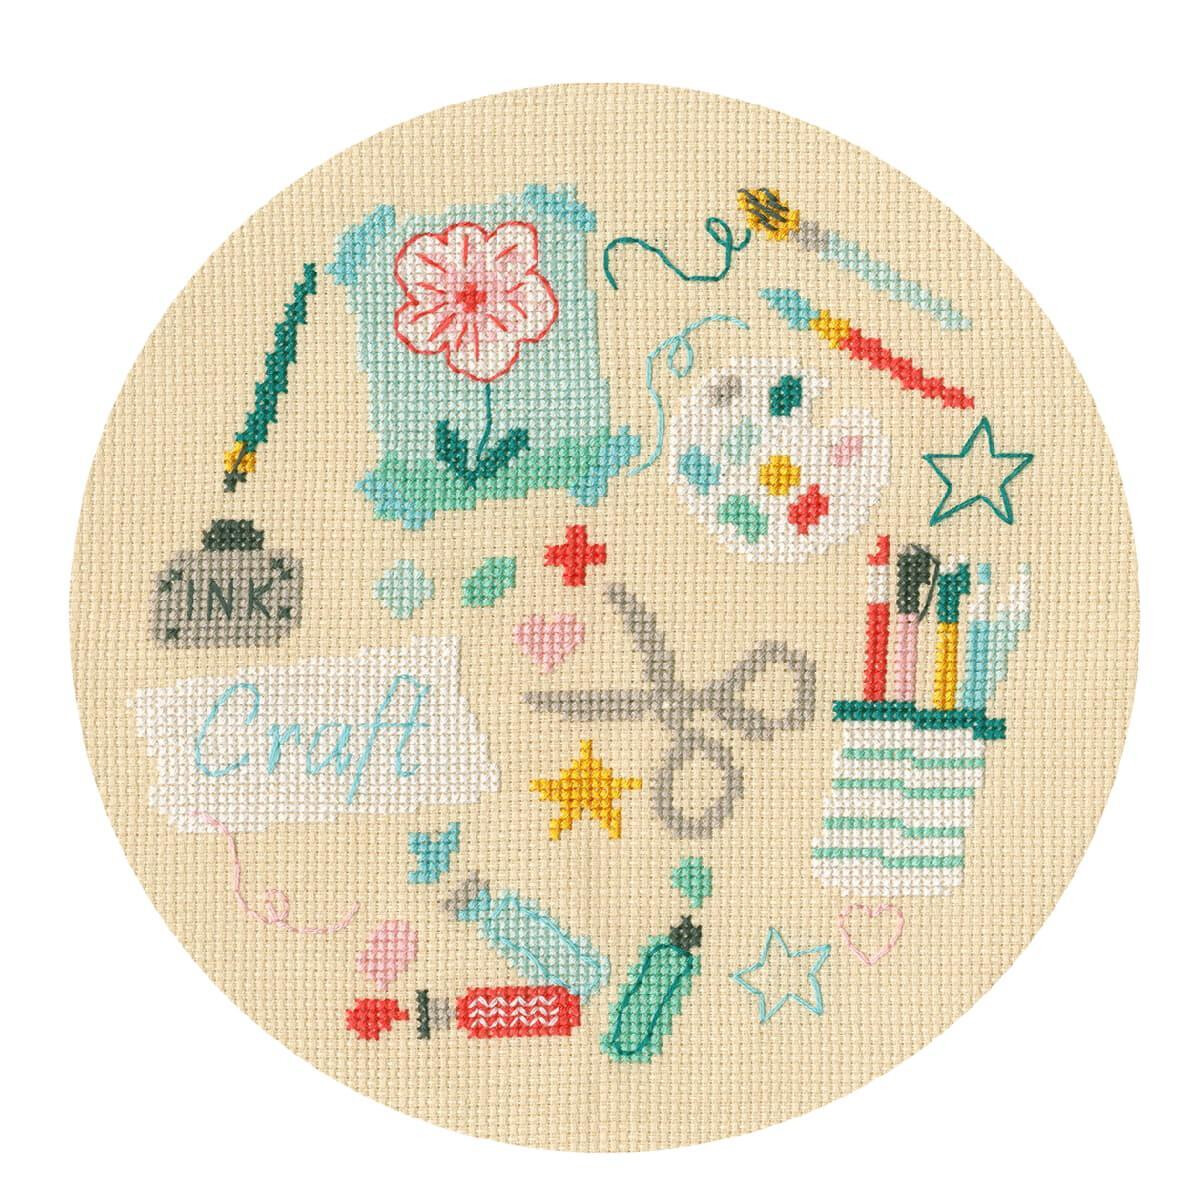 Bothy Threads counted cross stitch kit "Craft",...